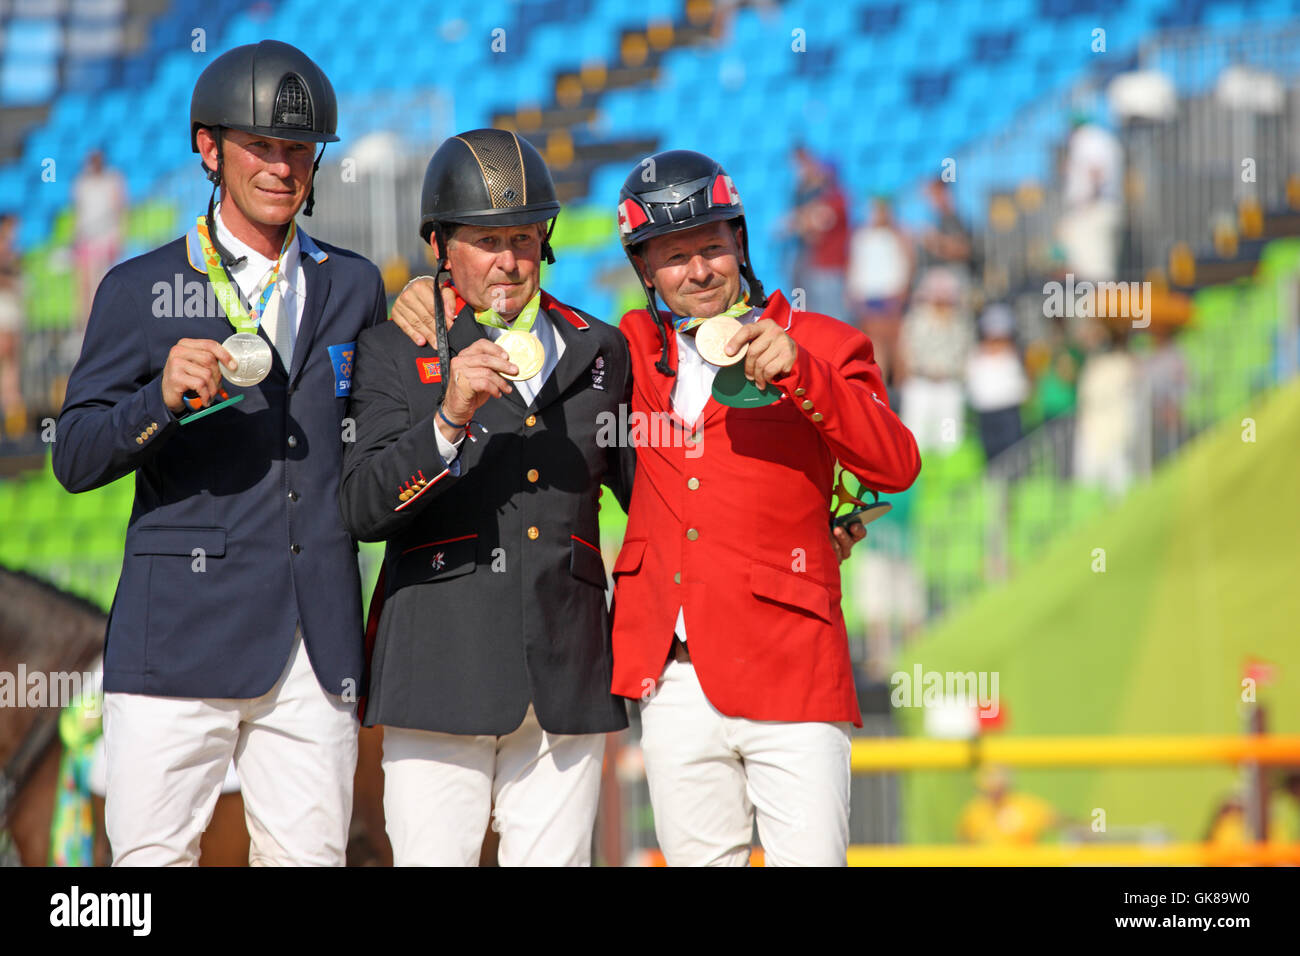 Rio de Janeiro, Brazil. 19th August, 2016. Centre - Nick Skelton GBR, Gold Medal Winner in the Olympic Equestrian Show Jumping  Left - Peder Fredricson of Sweden, the Silver Medal Winner Right - Eric Lamaze of Canada, the Bronze Medal Winner in Rio de Janeiro, Brazil. Stock Photo